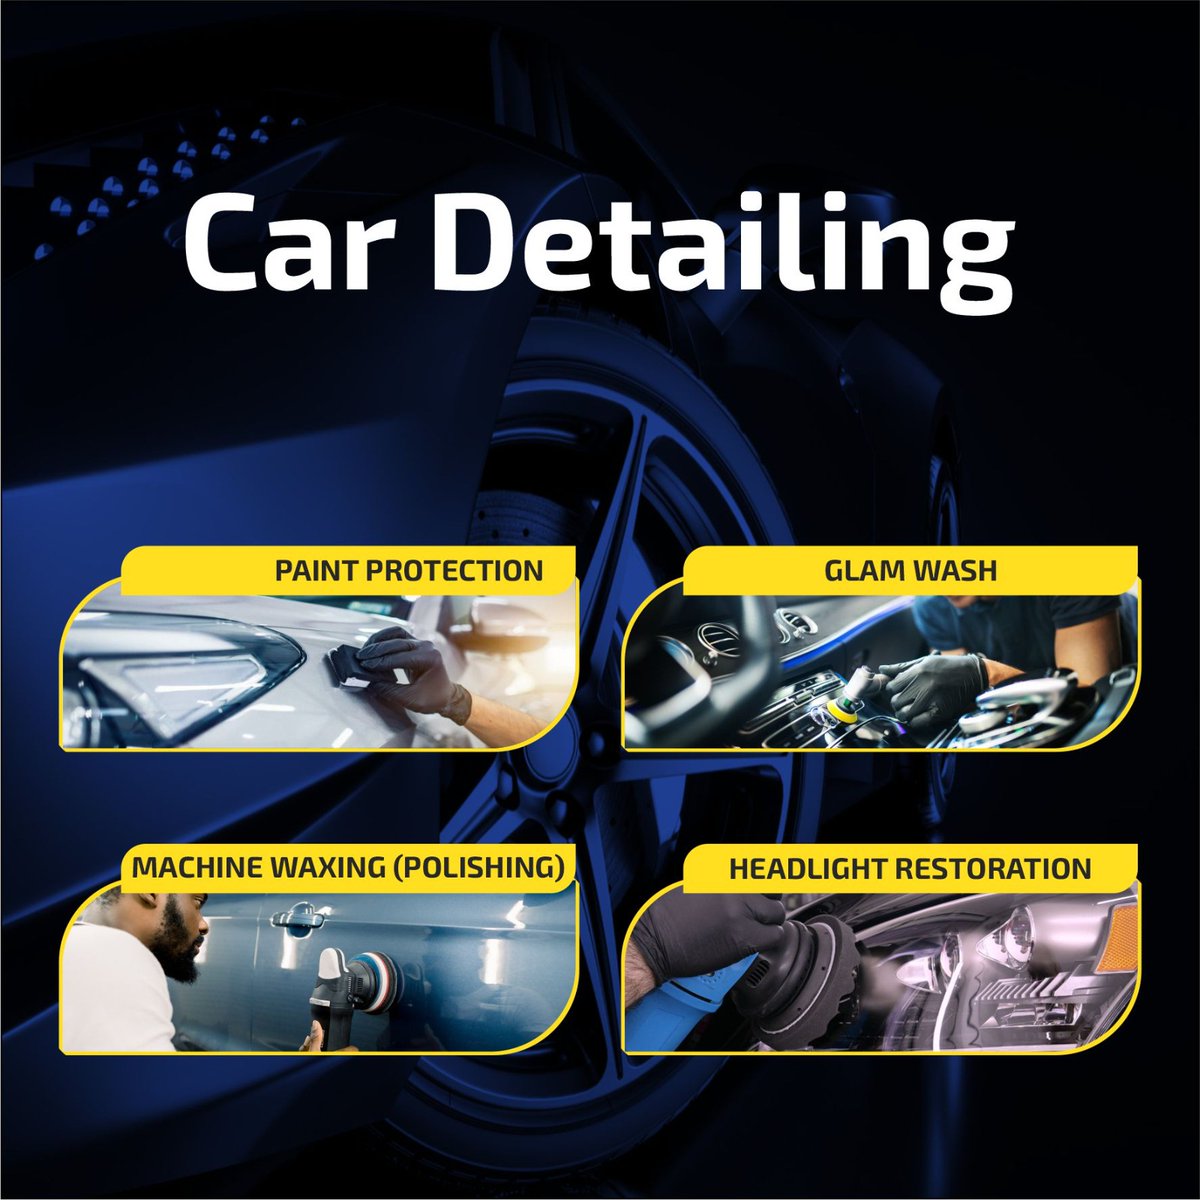 Your one-stop shop for all your car needs. Book an appointment today! 🚗💺 #CarGarage #ConvenientService #CarDetailing #CarPaint #CarPaintProtection #CarWash #CarPolishing #CarWazing #HeadlightRestoration